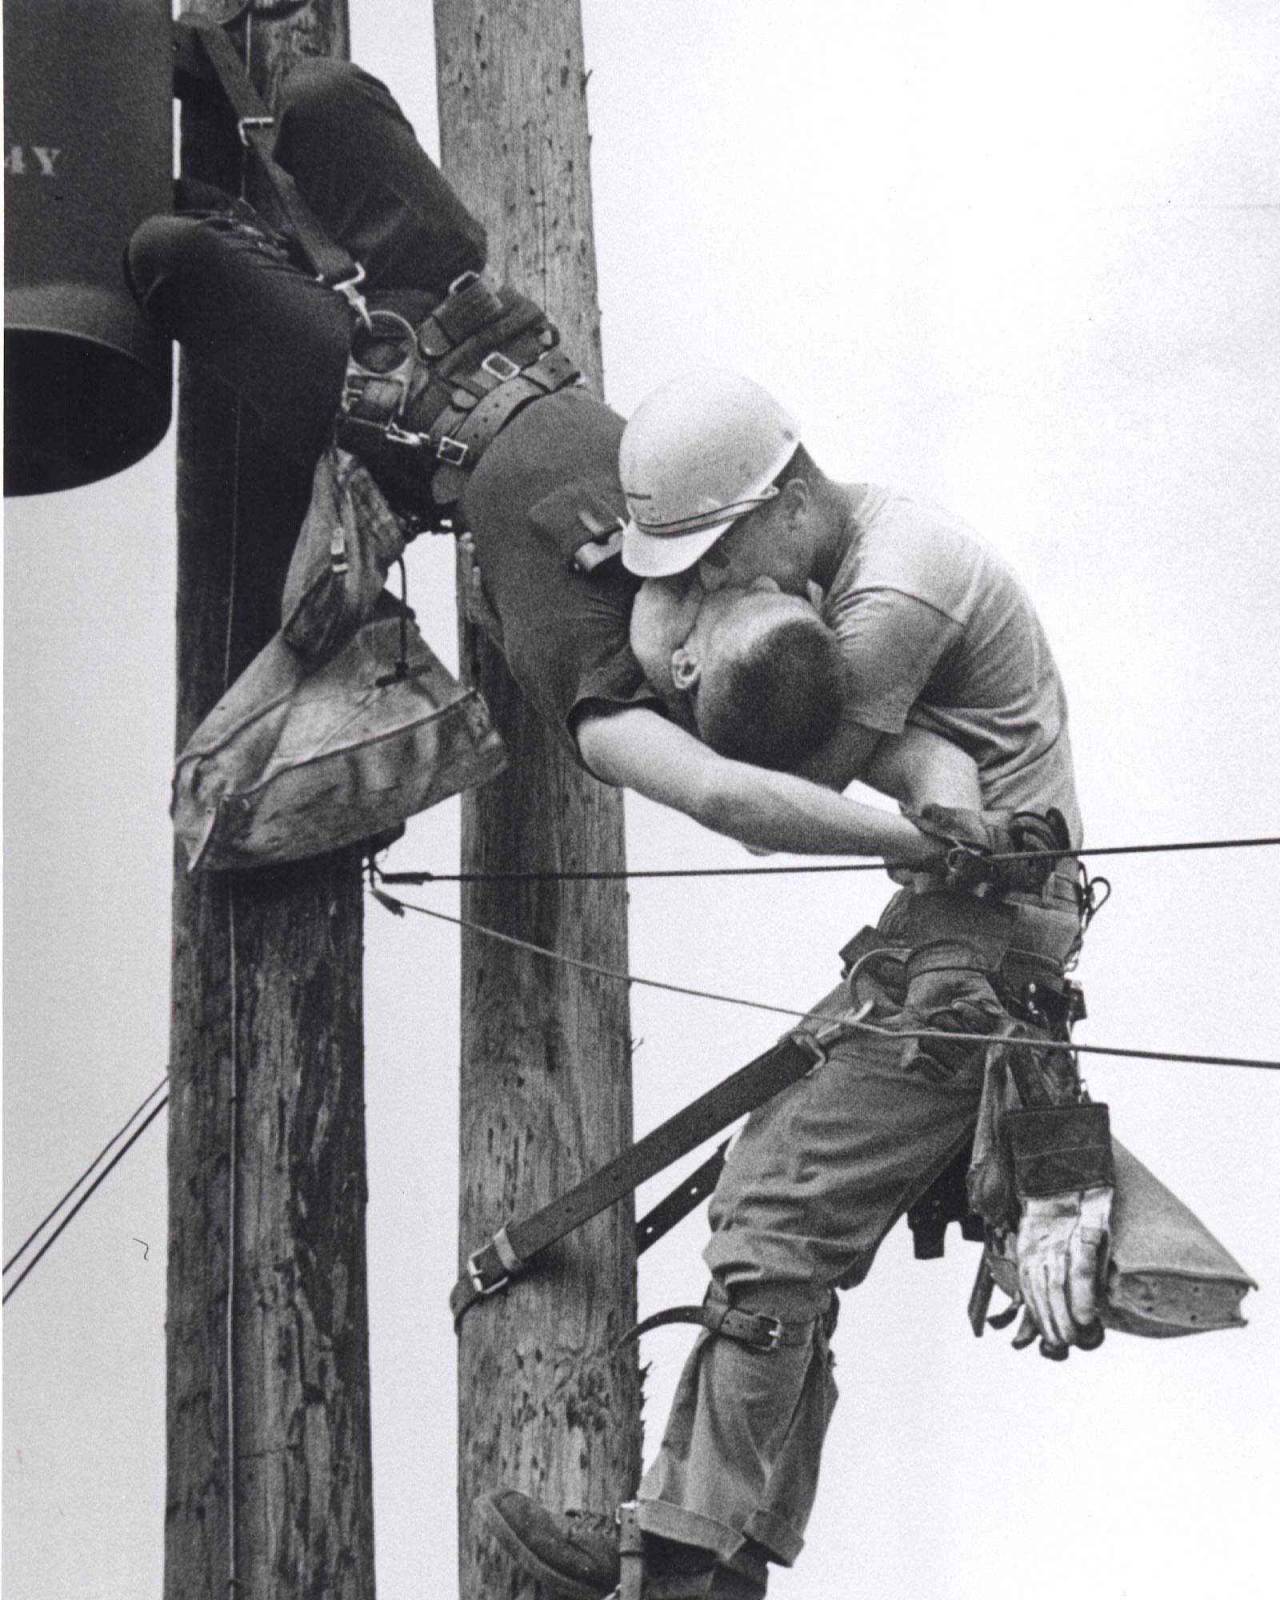 historium:
““The Kiss of Life” shows a utility worker named J.D. Thompson giving mouth-to-mouth to co-worker Randall G. Champion after he went unconscious following contact with a low voltage line, 1967. 1968 Pulitzer Prize, by Rocco Morabito
”